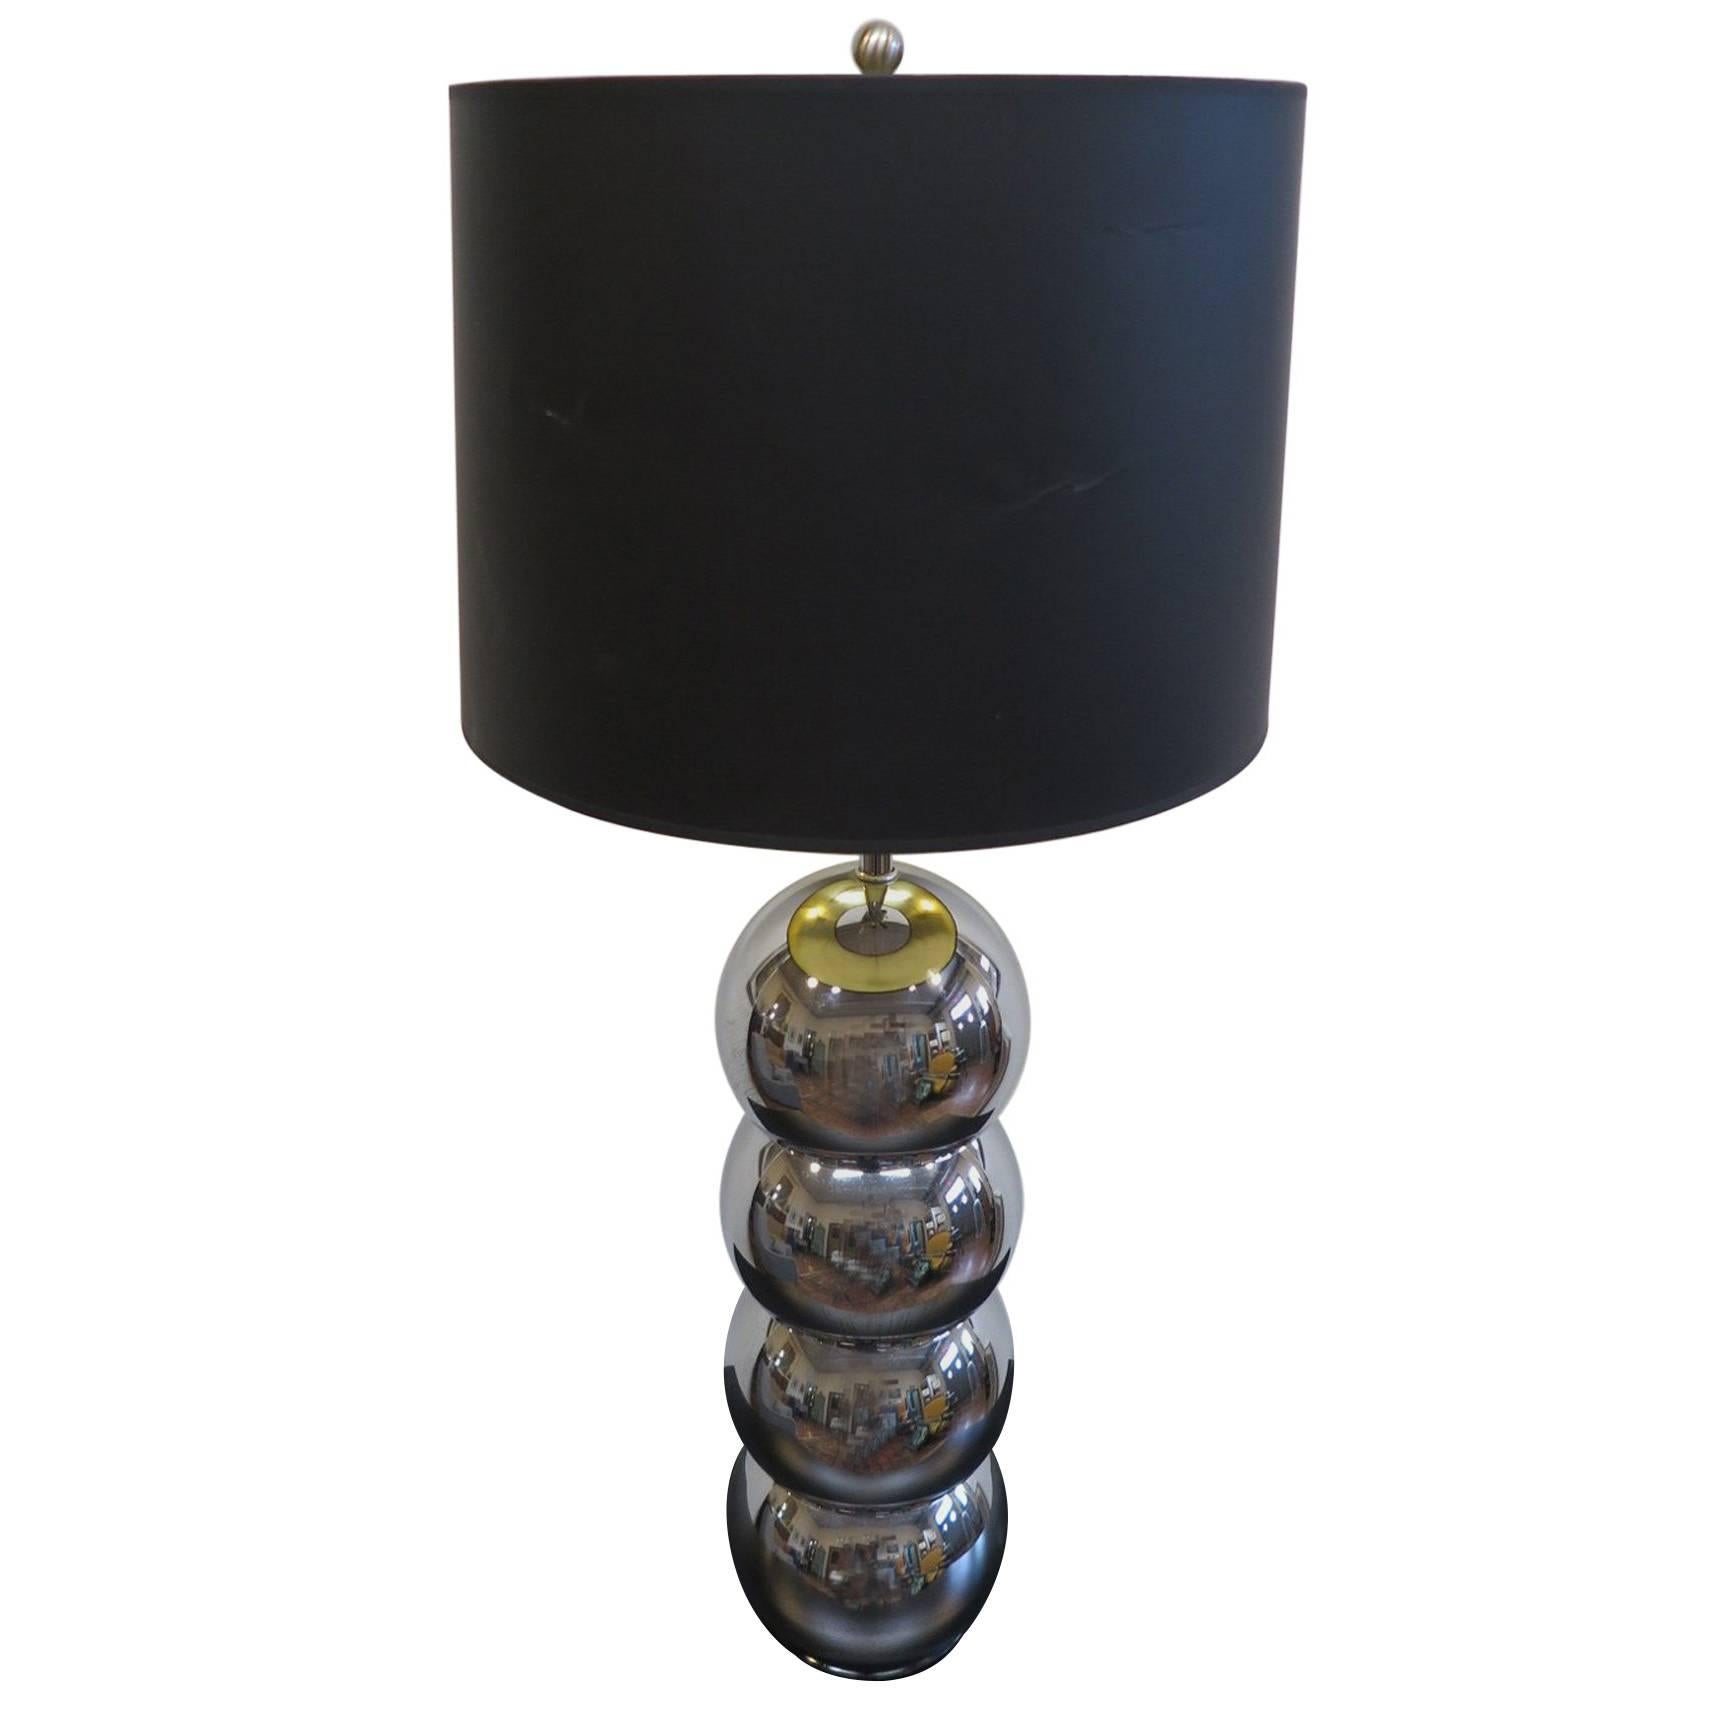 George Kovacs Stacked Chrome Sphere Lamp